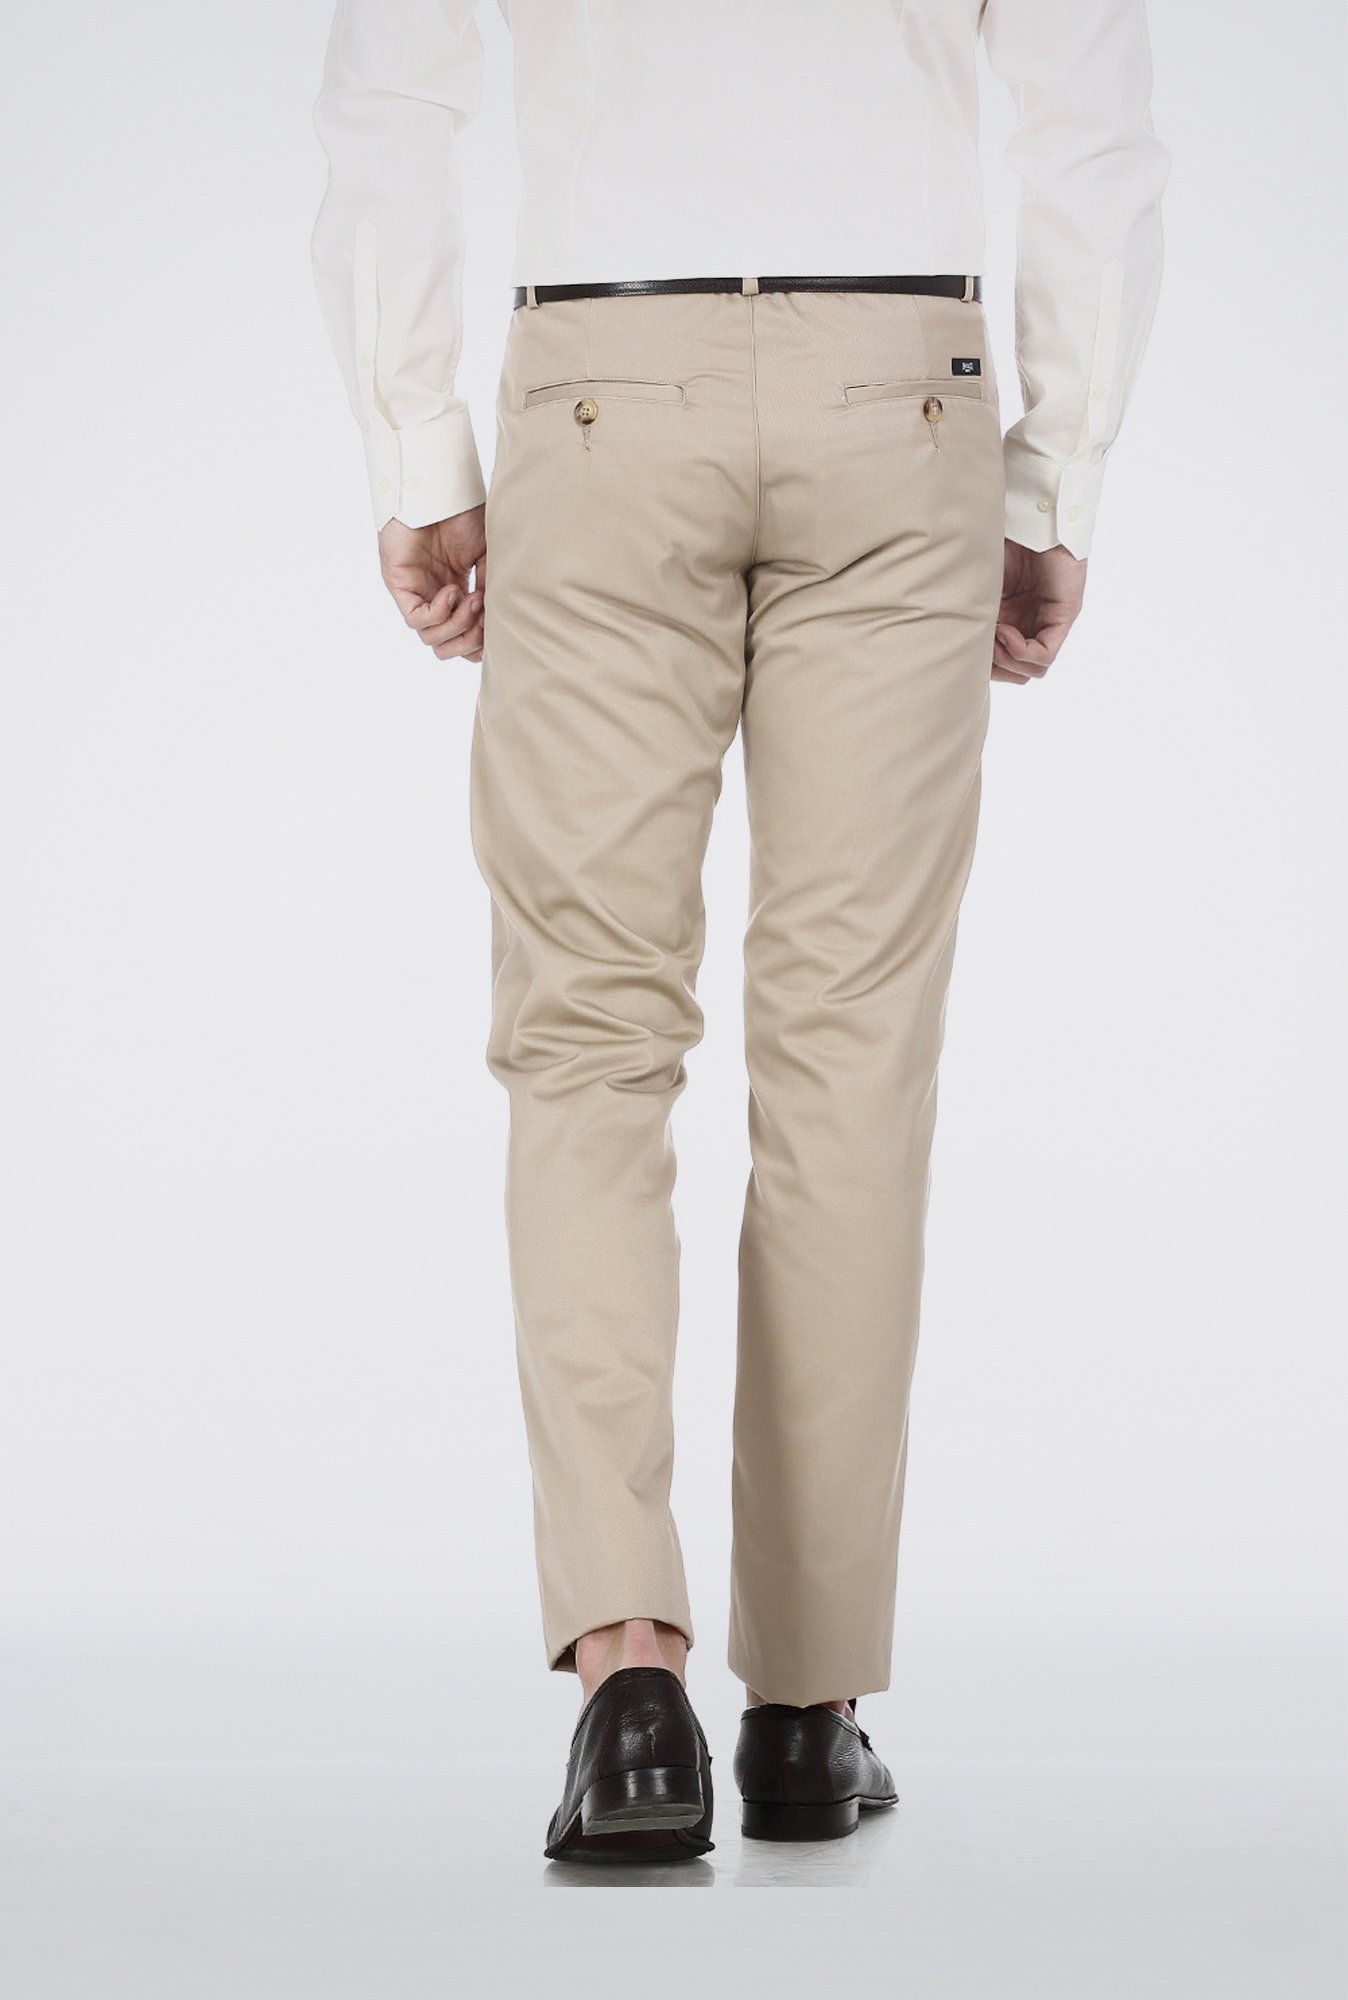 Haggar Iron Free Premium Khaki Mens Classic Fit Pleated Pant  JCPenney